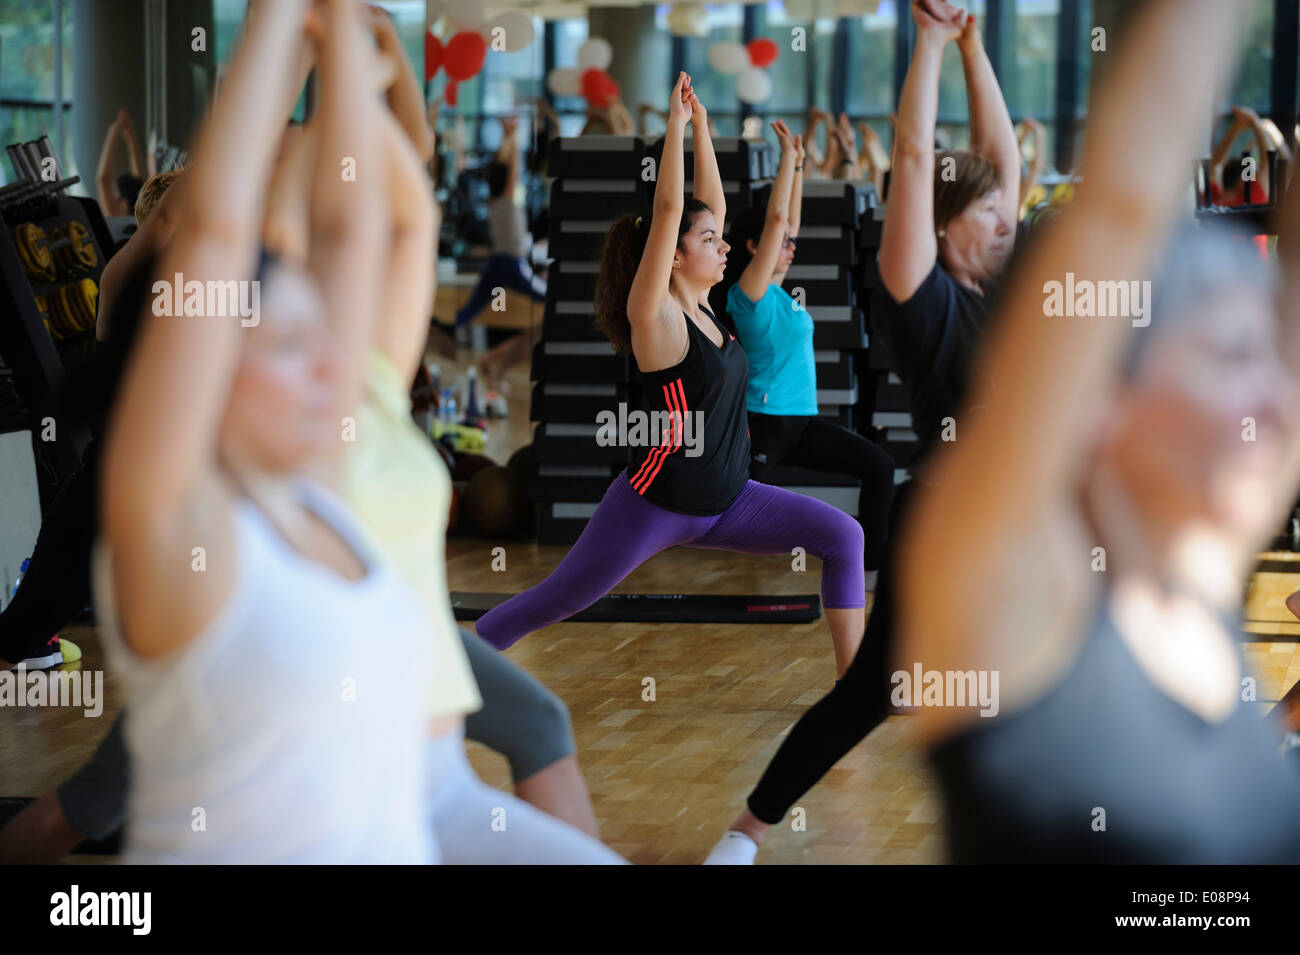 People stretching during Yoga fitness class at the gym Stock Photo